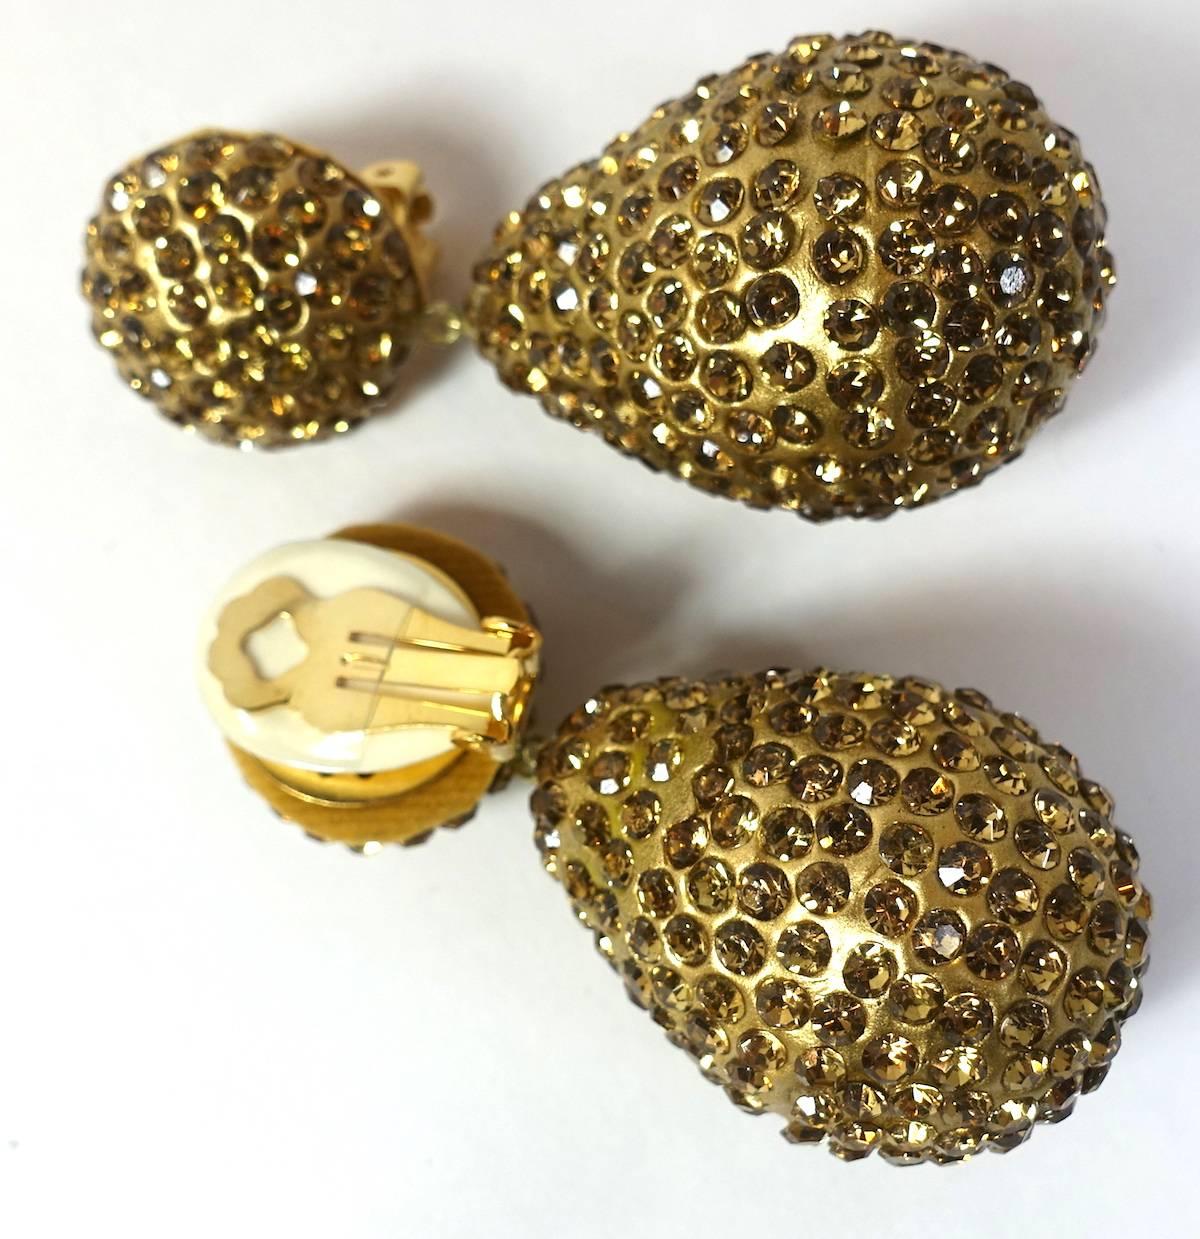 This signed Kenneth Jay Lane earrings feature gold tone crystals in a nickel-free gold-plated base metal setting.  These clip earrings measure 2-1/2” x 1-1/4” and are signed “Kenneth Lane”.  They are in excellent condition.